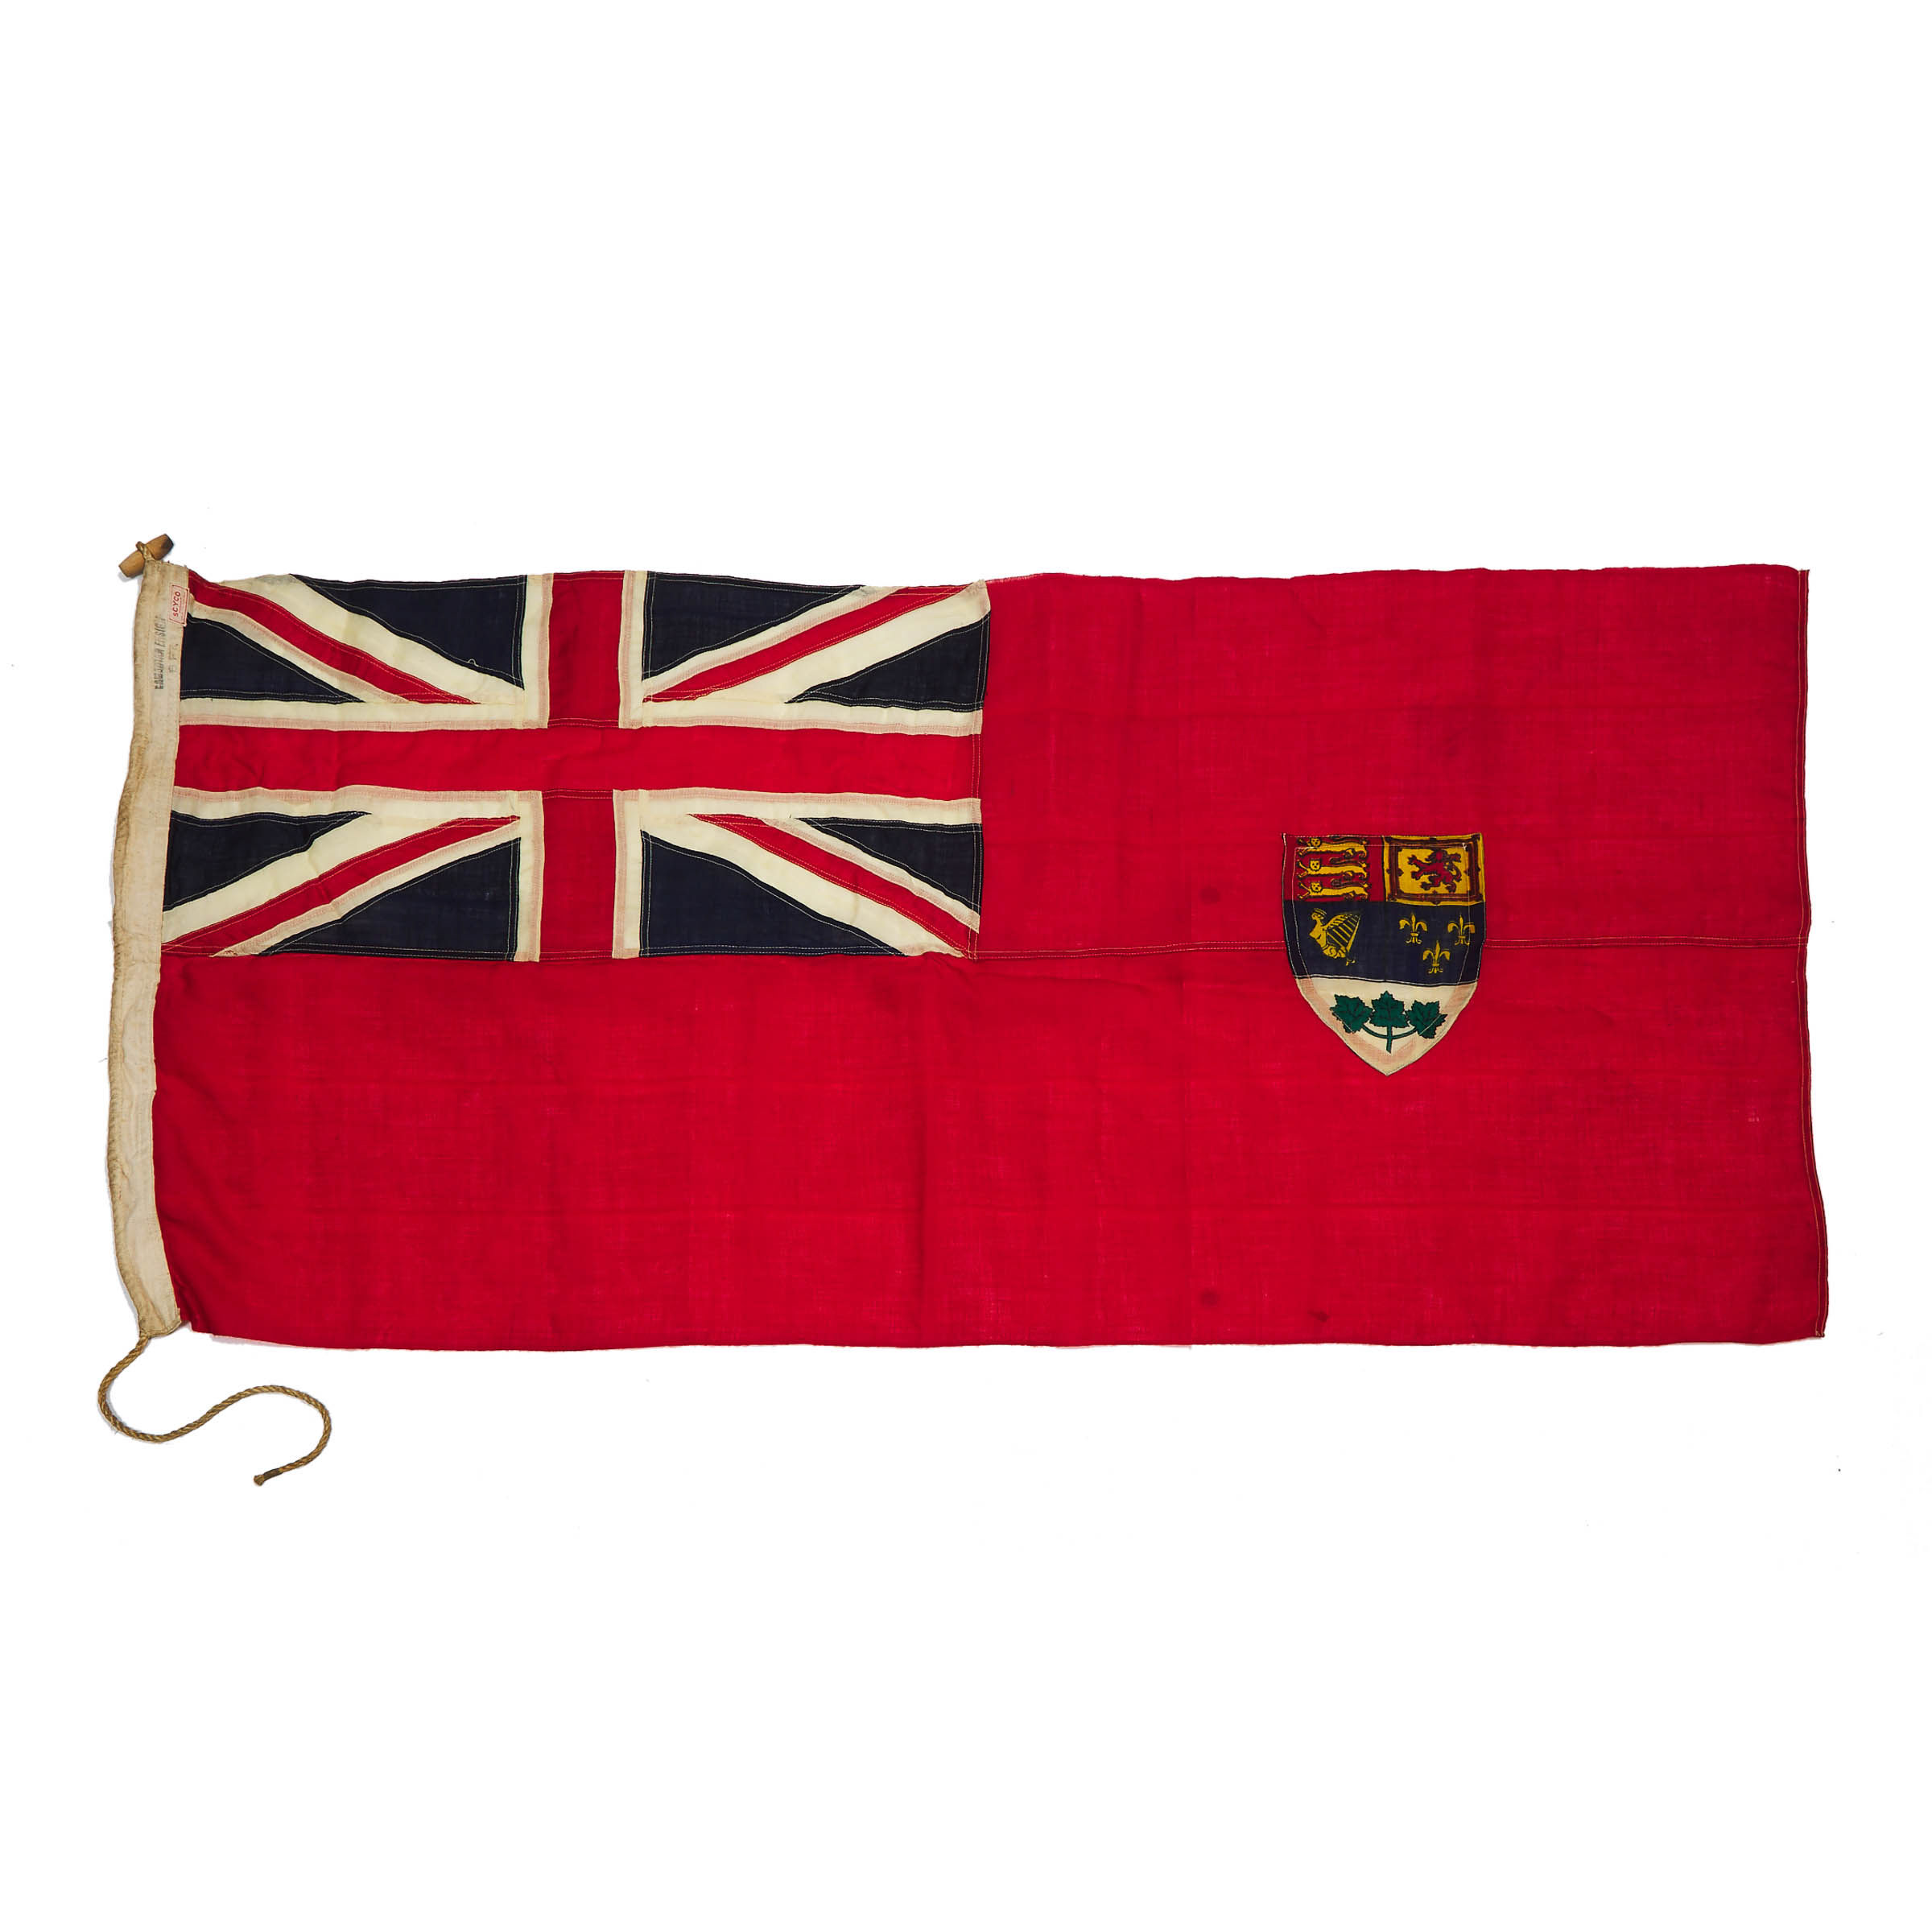 WWII Era Canadian Red Ensign, mid 20th century